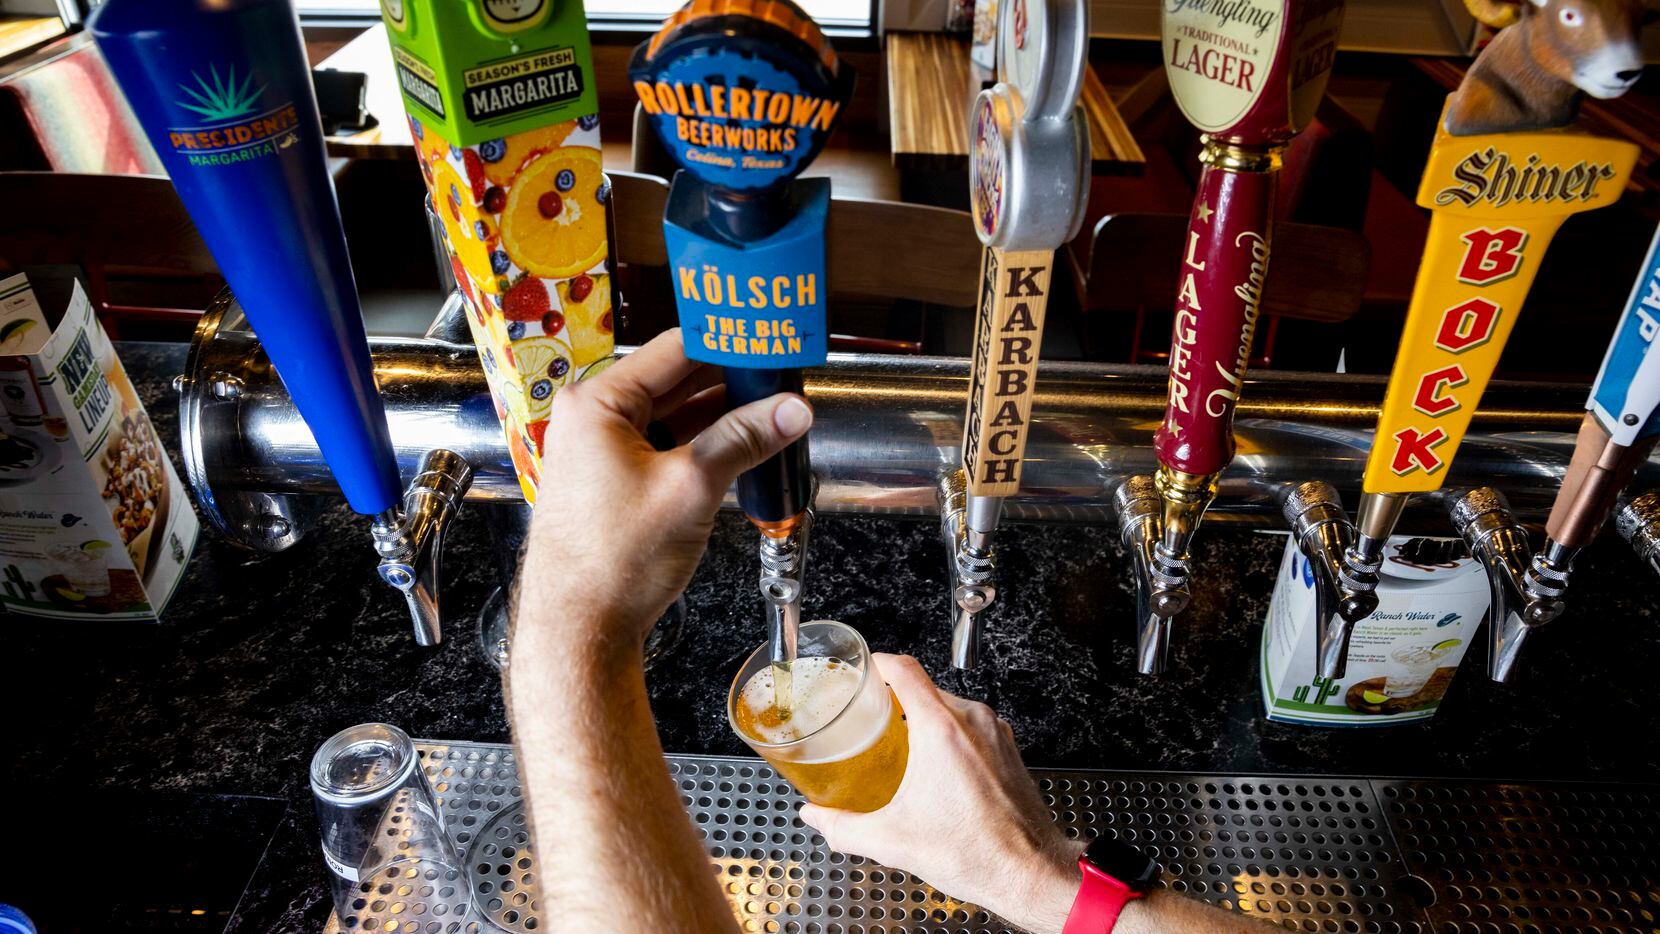 Bartender Greg Miller pours a glass of Rollertown Beerworks’ new kolsch beer at Chili's in...